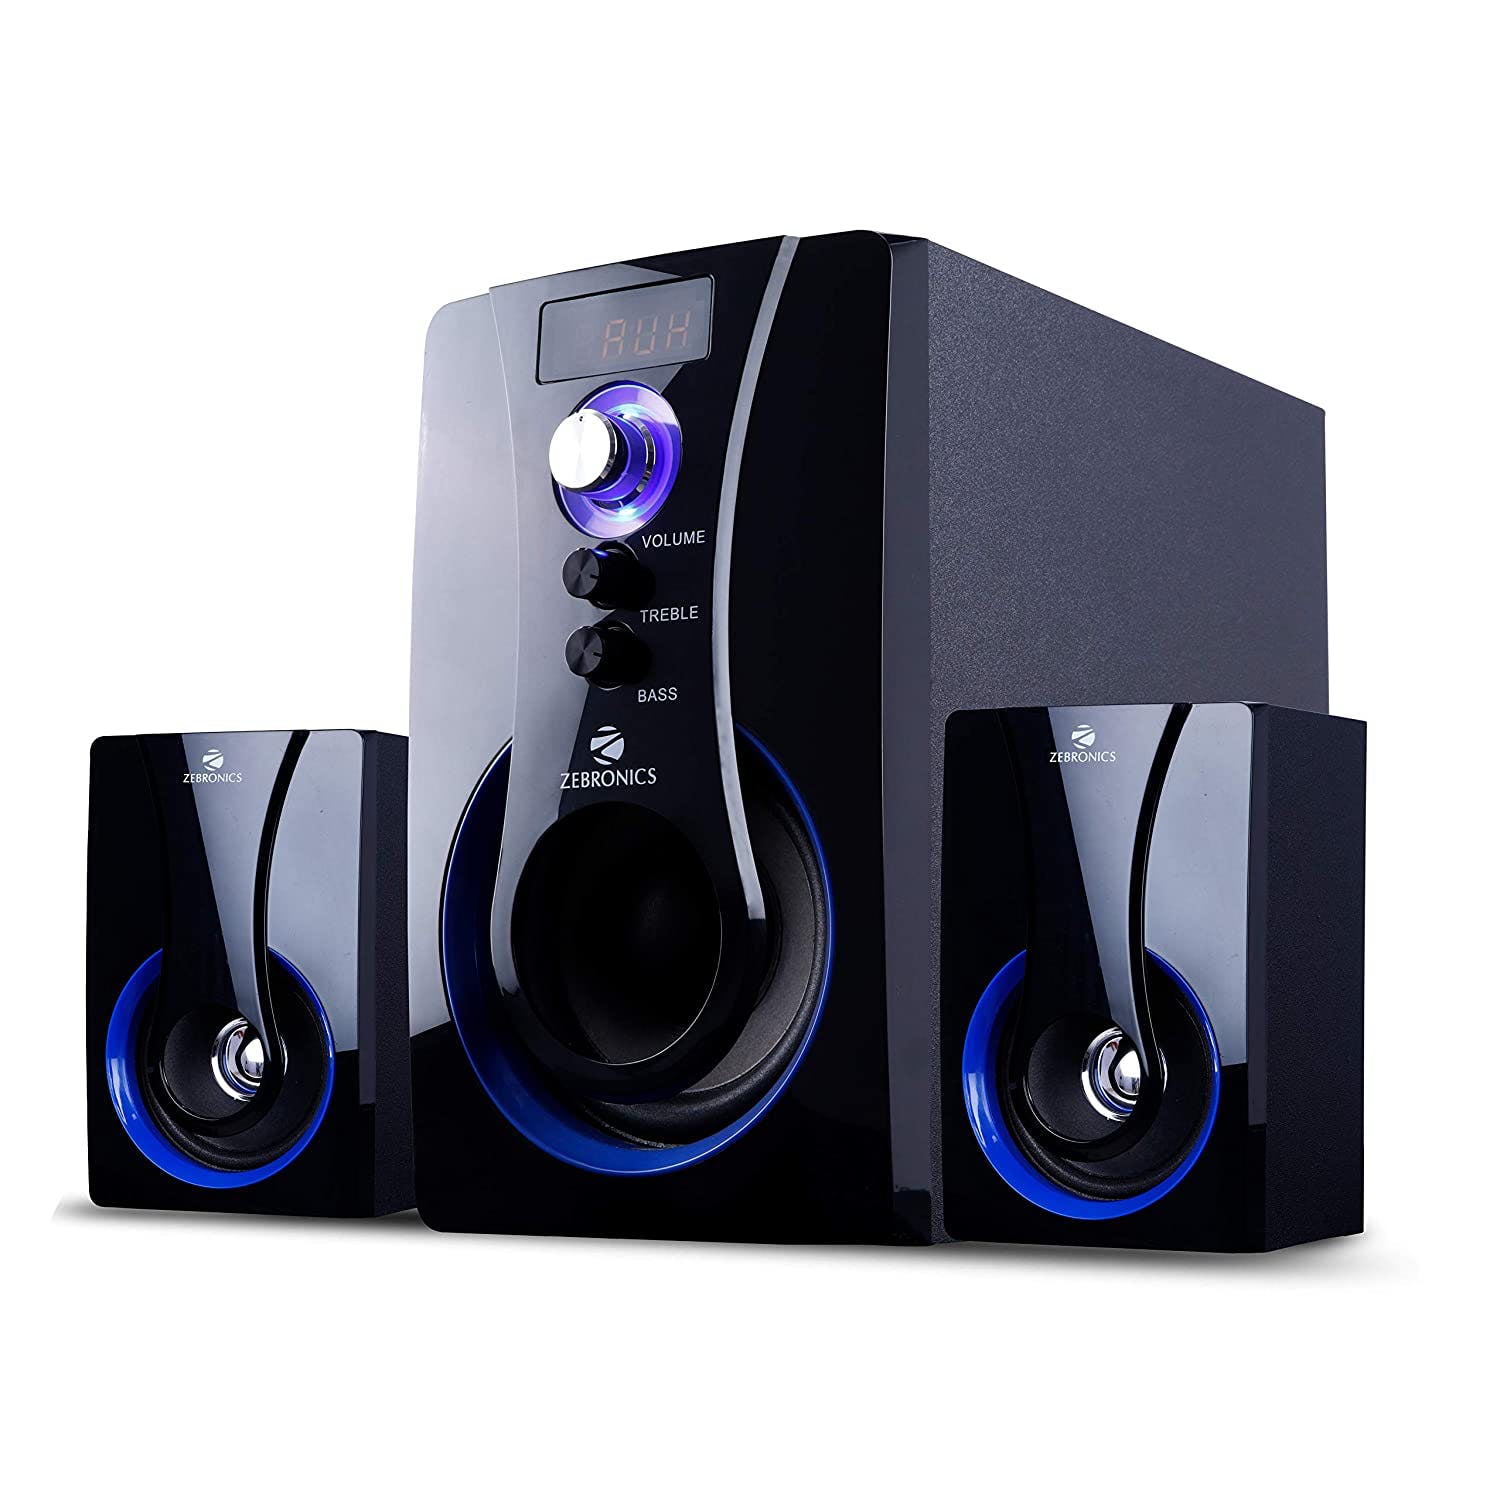 Zebronics Computer Multimedia 2.1 Speaker with Bluetooth, SD Card, USB, AUX, FM and Remote Control